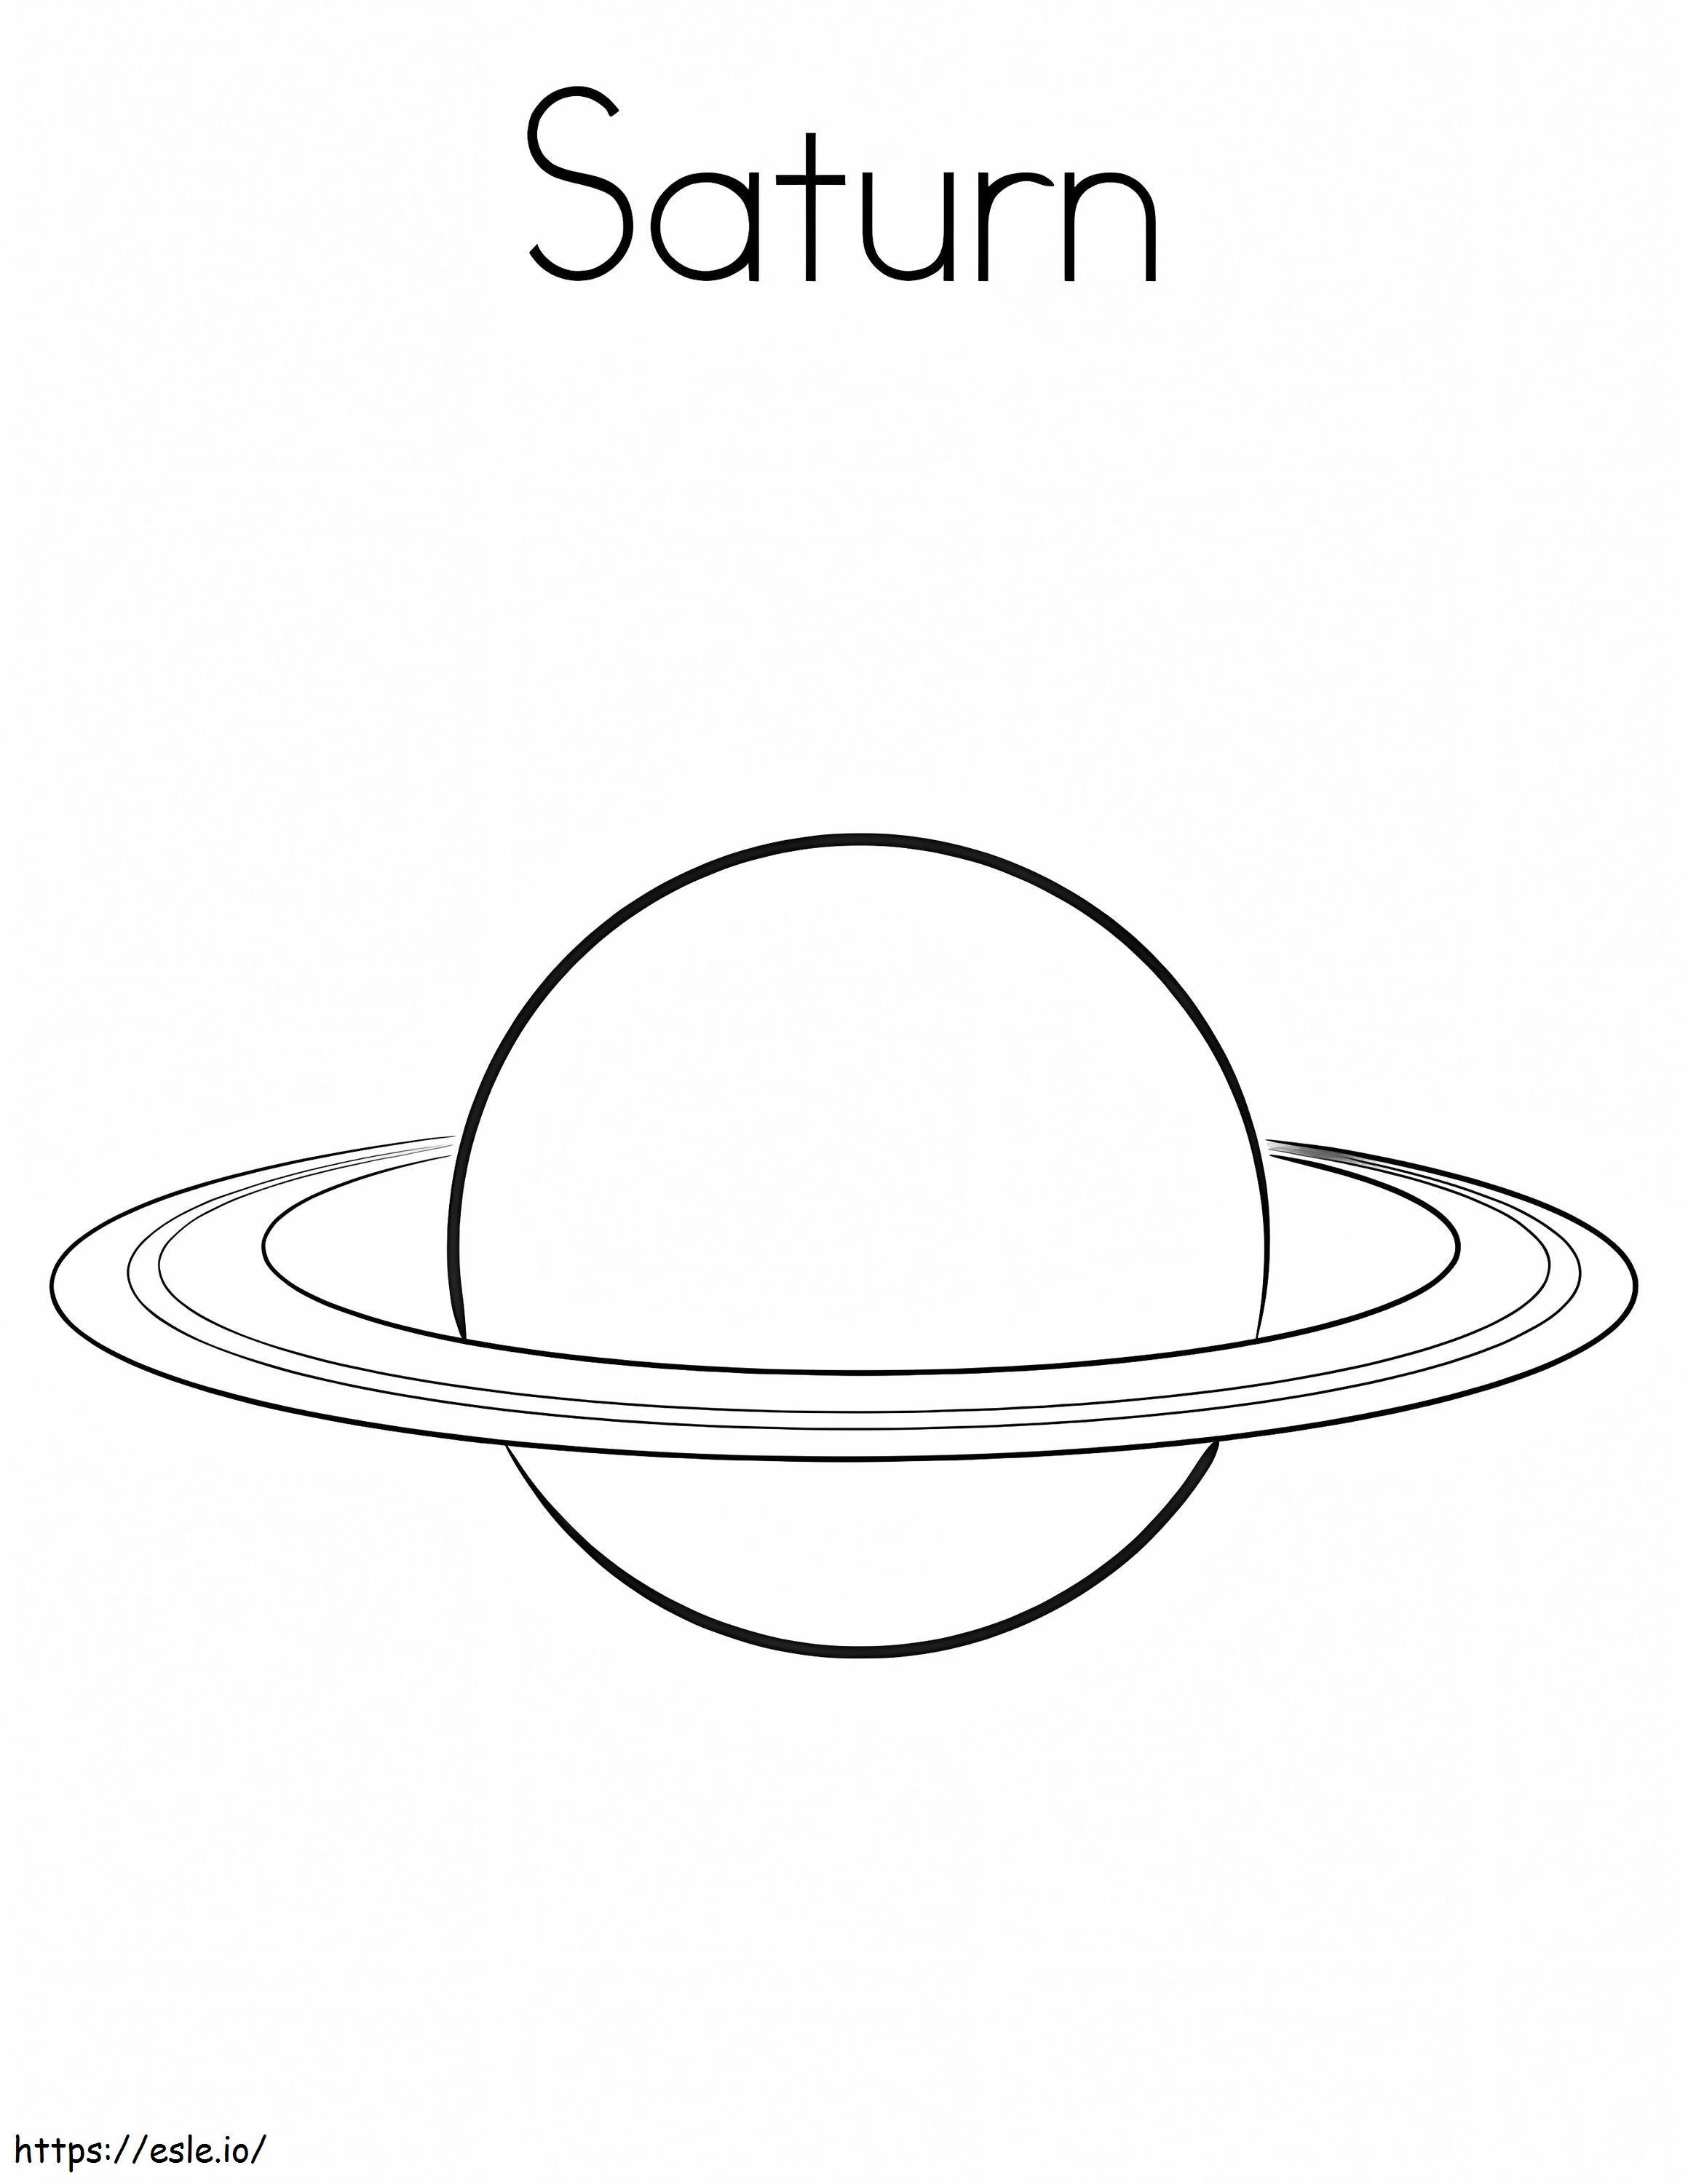 Normal Saturn coloring page